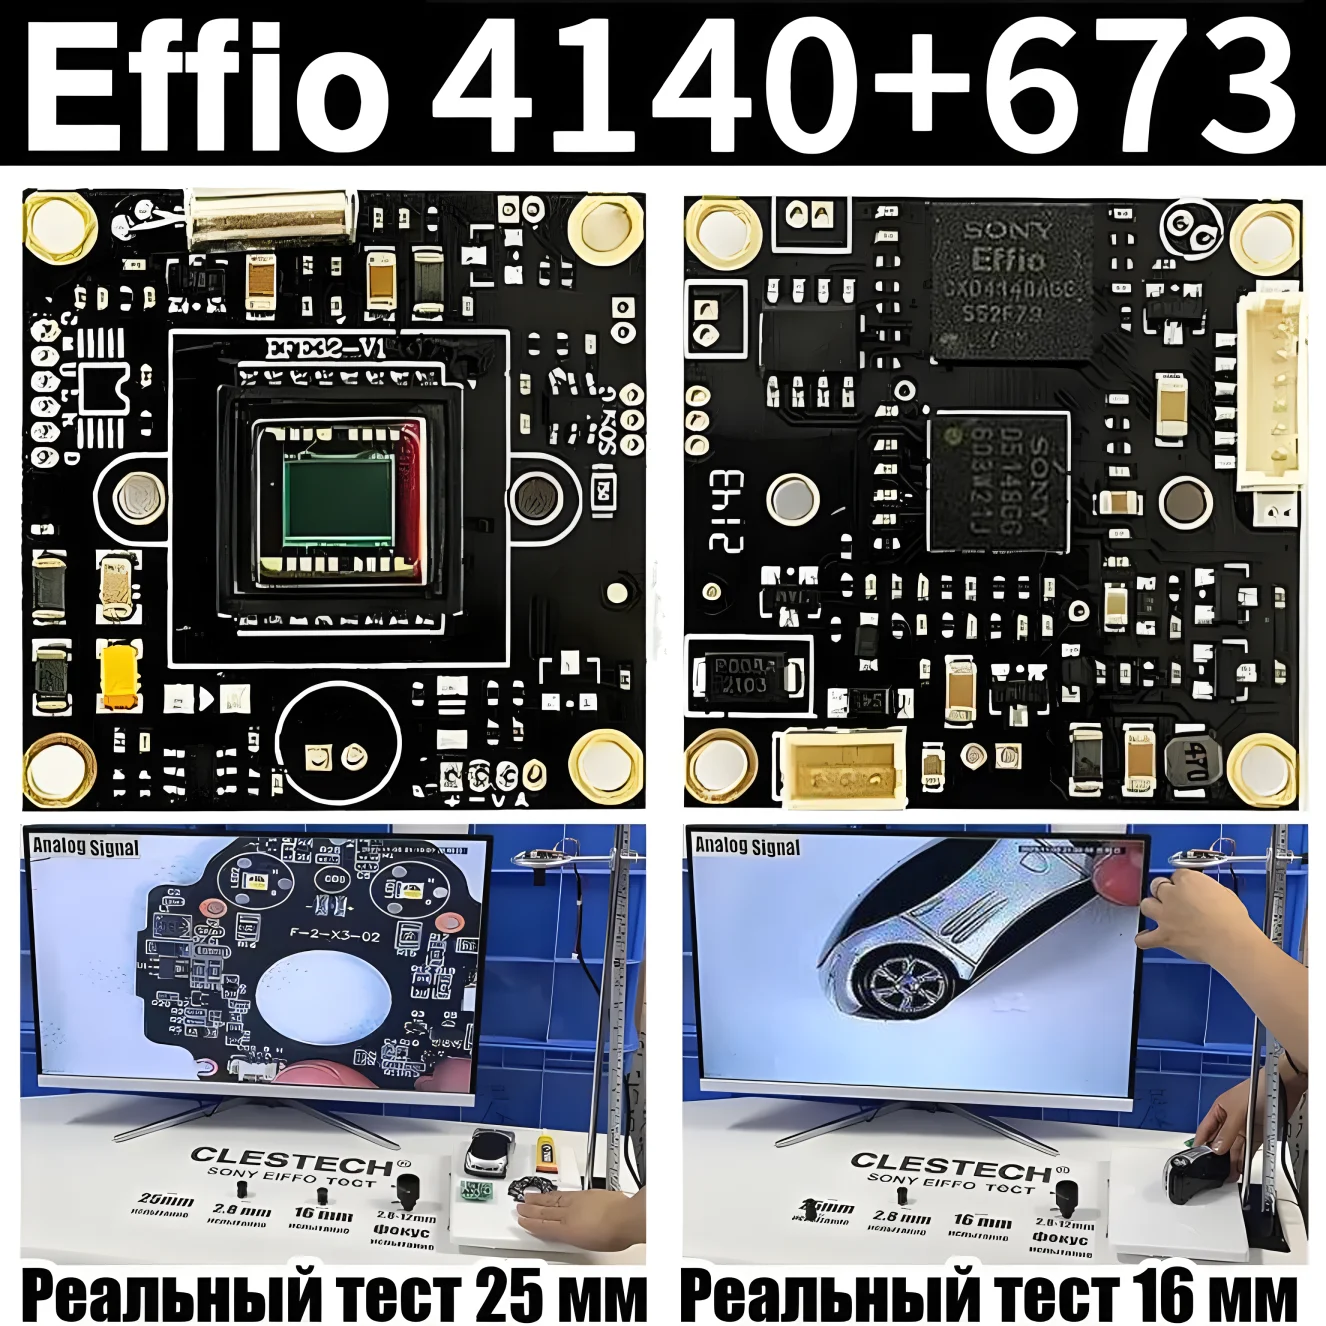 CLESTECH Camera Module Sony Effio CCD 4140+673 800TVL Chip Circuit Board HD CCTV Analog 960H OSD Cable Microscope DIY Monitoring 1 5t 11pin bnc video dc12v power osd control pigtail cable analog cctv camera module board menu button end cable   white